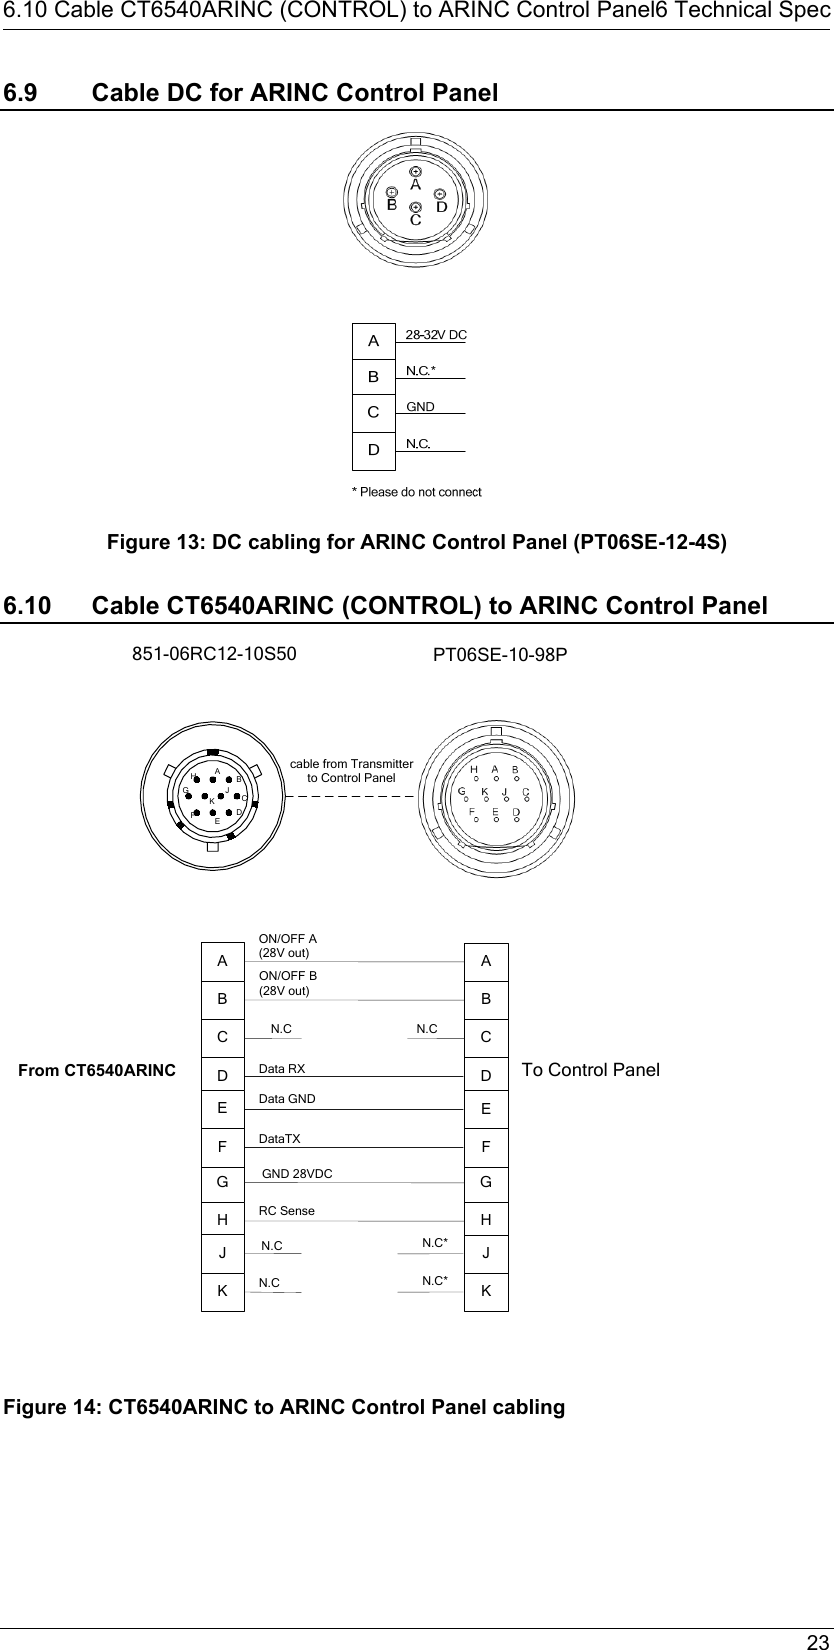  23  6.10 Cable CT6540ARINC (CONTROL) to ARINC Control Panel6 Technical Spec6.9  Cable DC for ARINC Control Panel  Figure 13: DC cabling for ARINC Control Panel (PT06SE-12-4S) 6.10 Cable CT6540ARINC (CONTROL) to ARINC Control Panel GHJKTo Control PanelCDEFABData RXData GNDDataTX GND 28VDCN.CN.CN.C*N.C*From CT2440ARINCON/OFF A (28V out)PT06SE-10-98P851-06RC12-10S50ABCDEFGHJKcable from Transmitter to Control PanelGHJKCDEFABON/OFF B (28V out)N.C N.CRC Sense Figure 14: CT6540ARINC to ARINC Control Panel cabling      From CT6540ARINC 